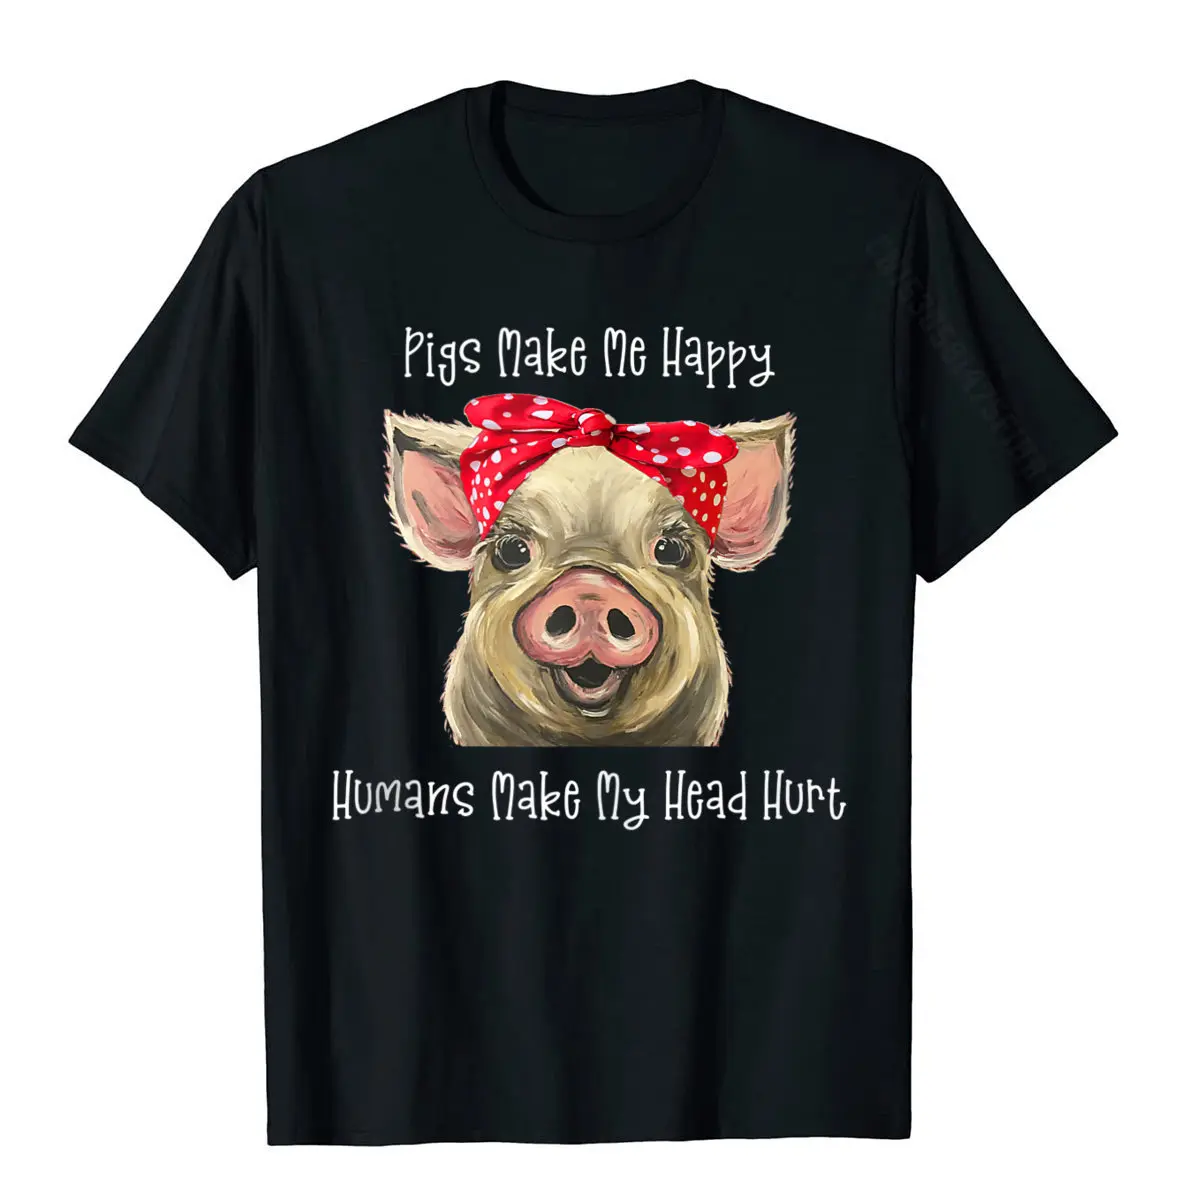 Pigs Make Me Happy, Pig Bandana, Pig Lover Gift Basic Top Cotton Tops Tees Normal Funny Unique T Shirts